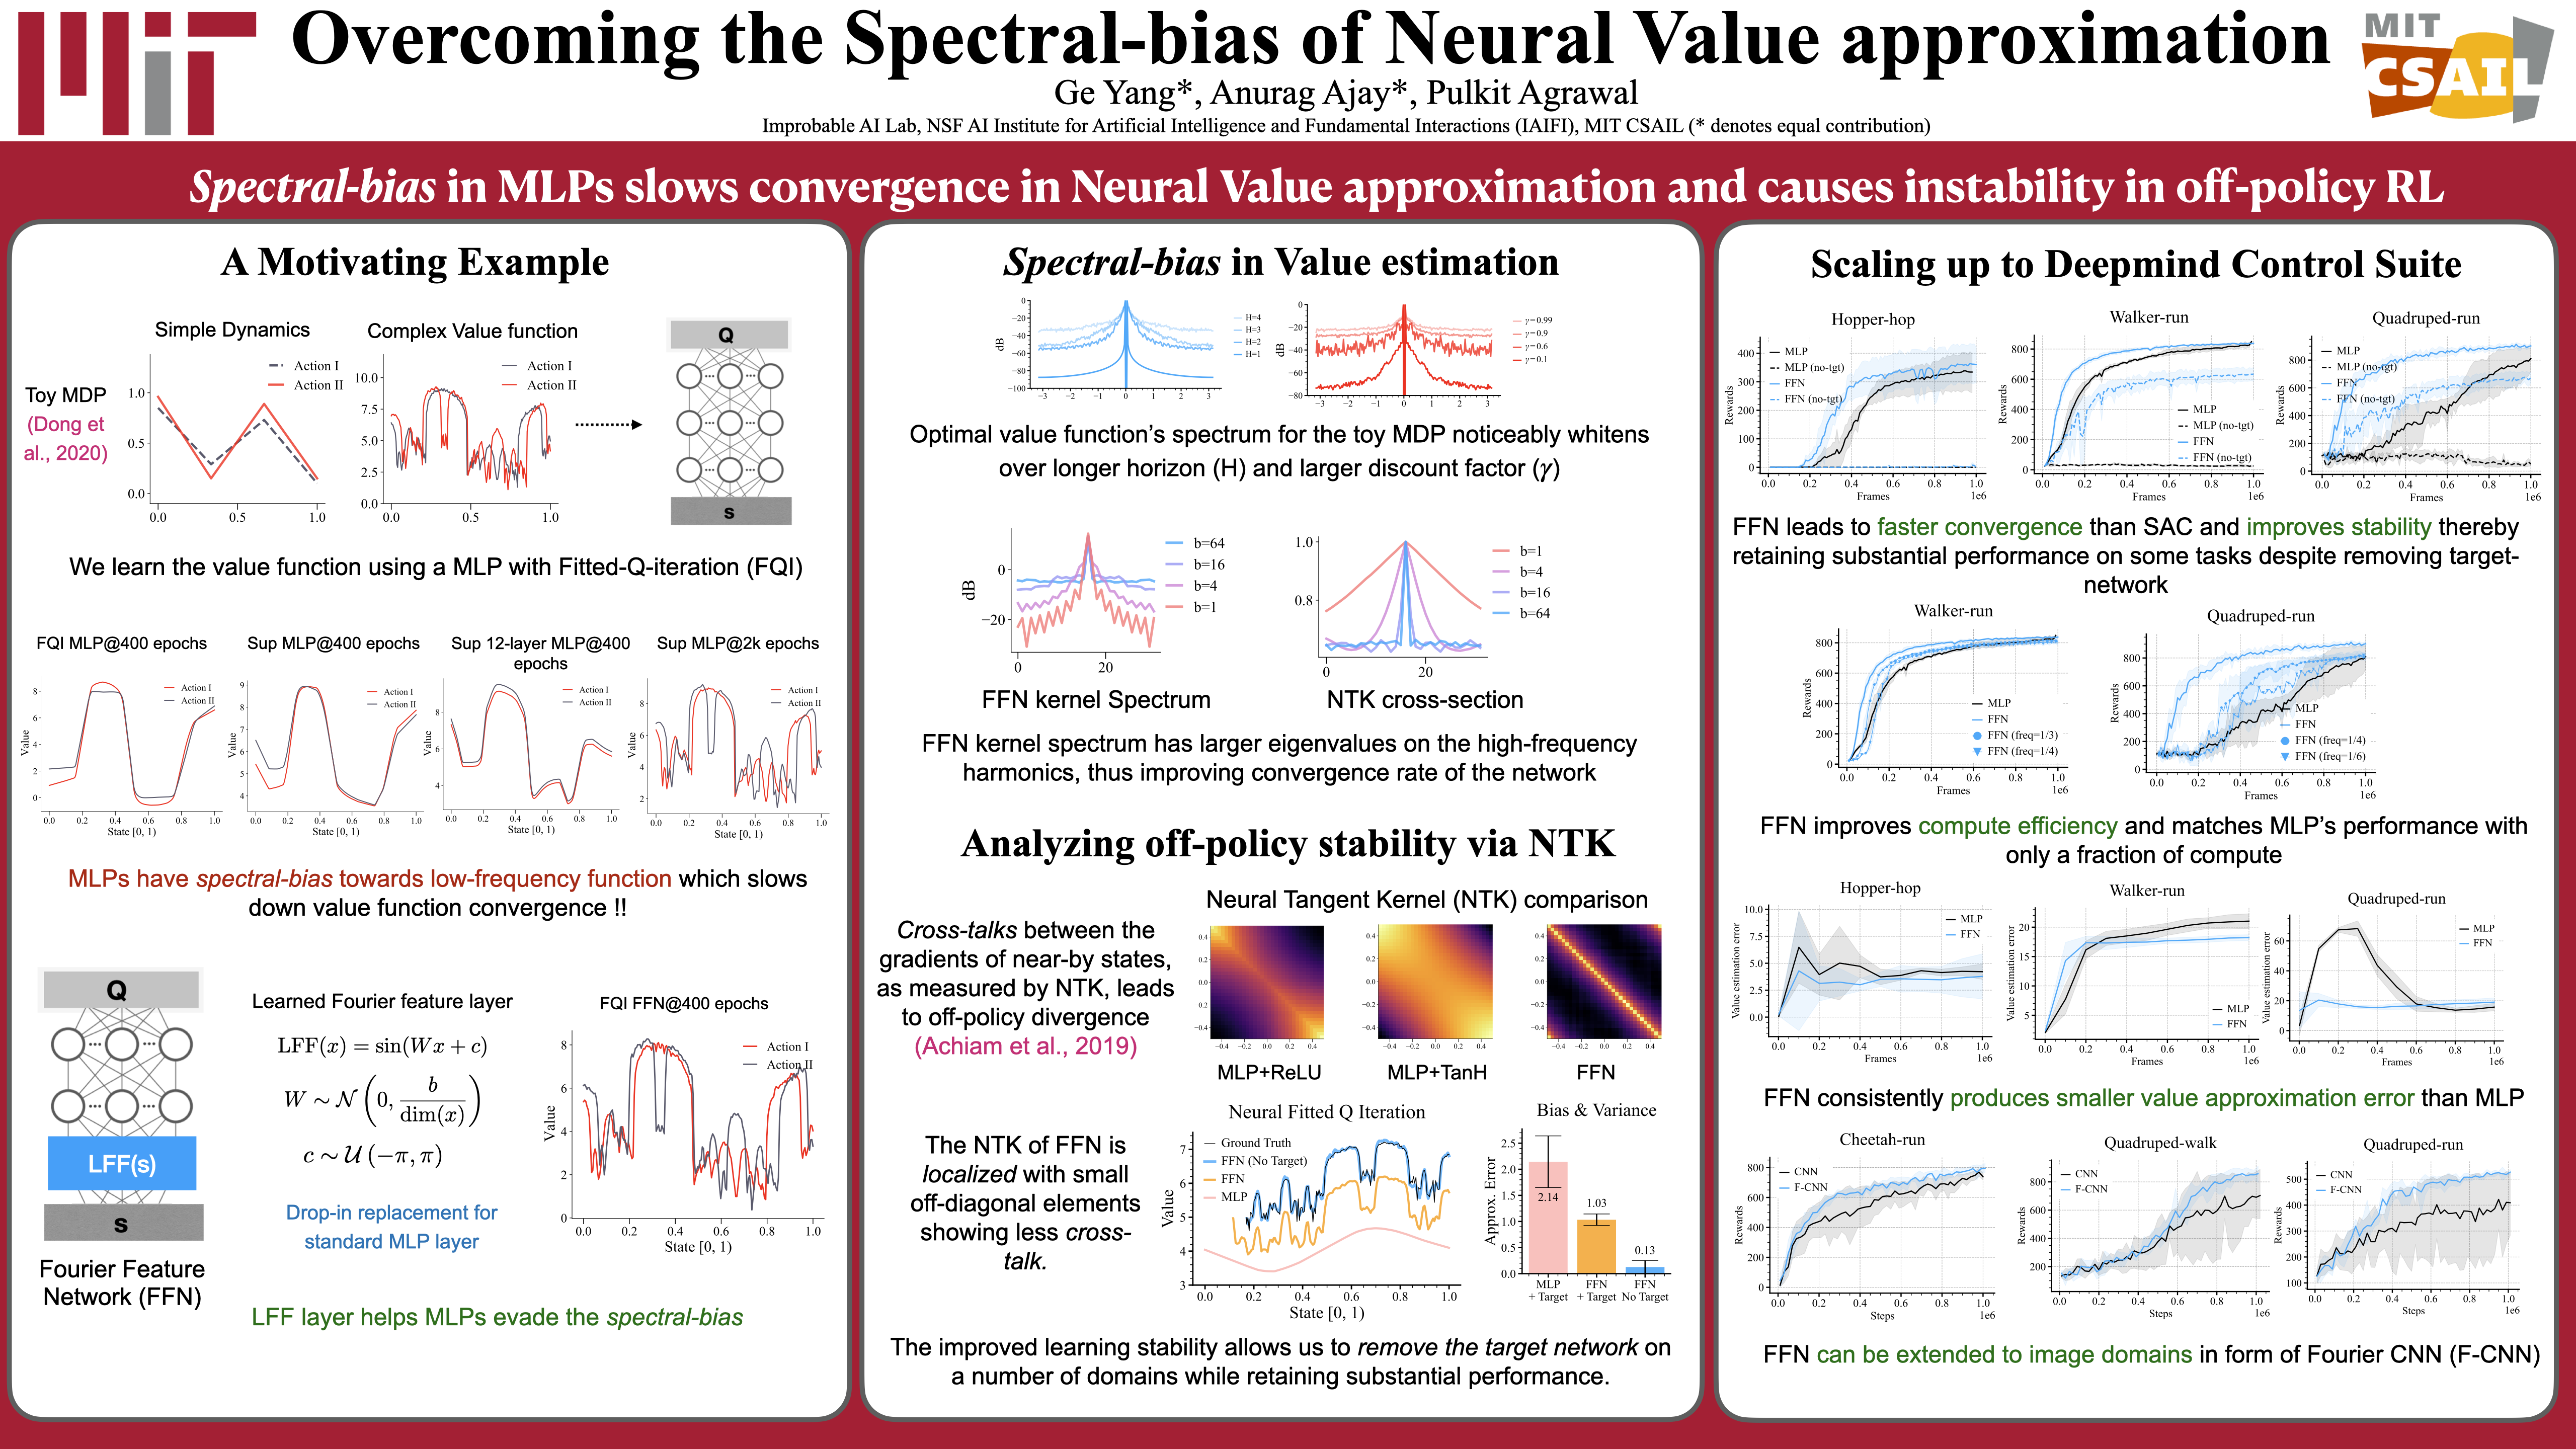 Poster presentation from Anurag Ajay titled "Overcoming The Spectral Bias of Neural Value Approximation"